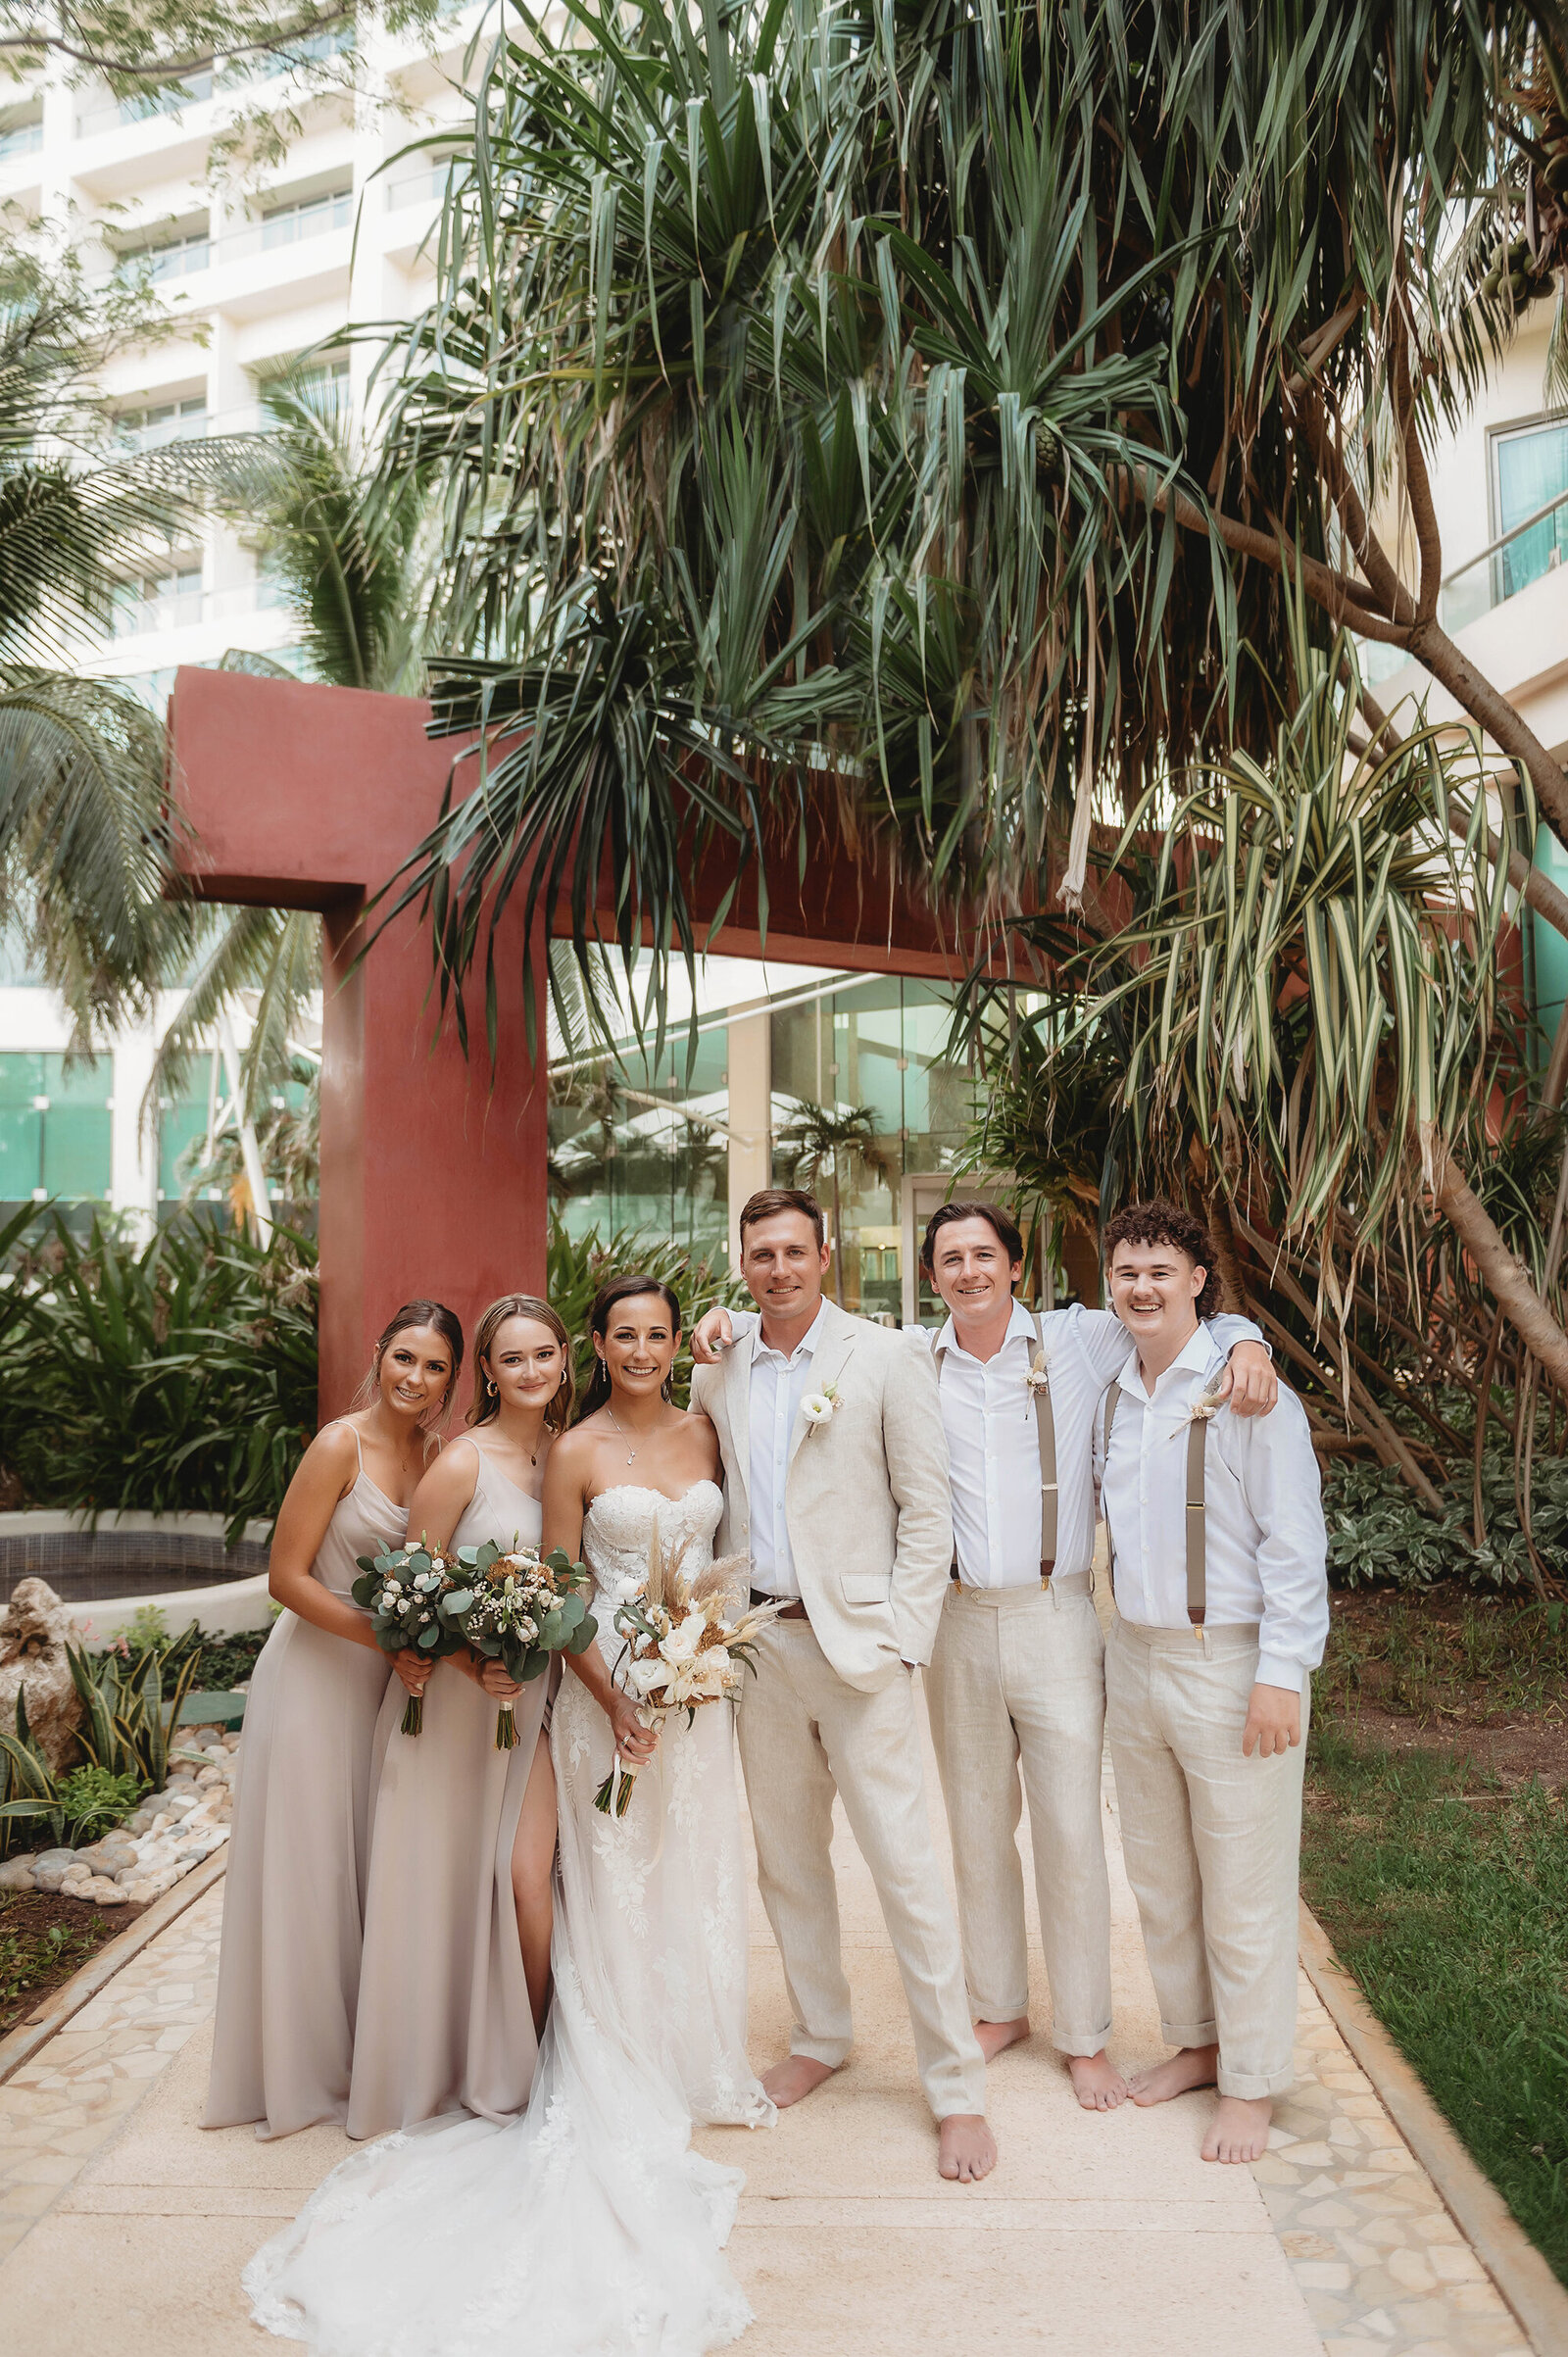 Bridal Party poses for portraits after Elopement Ceremony at Live Aqua Resort in Cancun, Mexico.